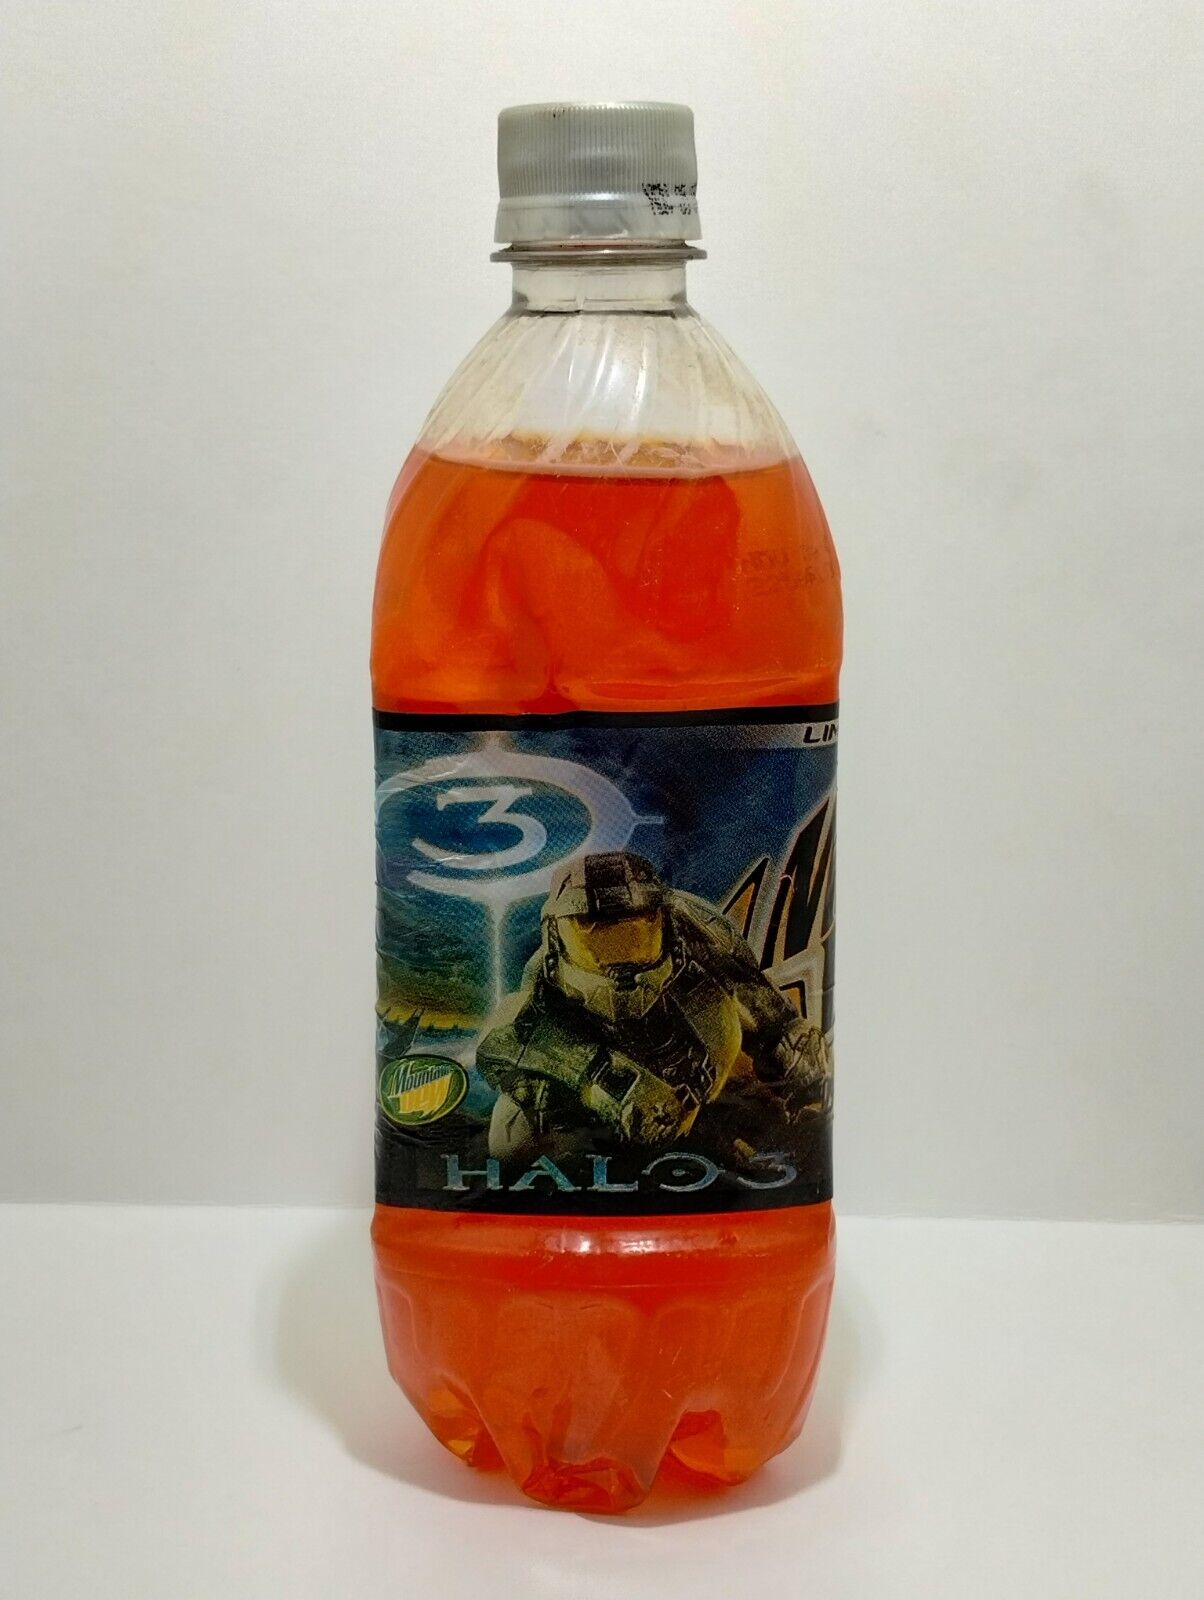 ORIGINAL 2007 Halo 3 Mountain Dew Game Fuel Limited Edition 20oz Unopened SEALED